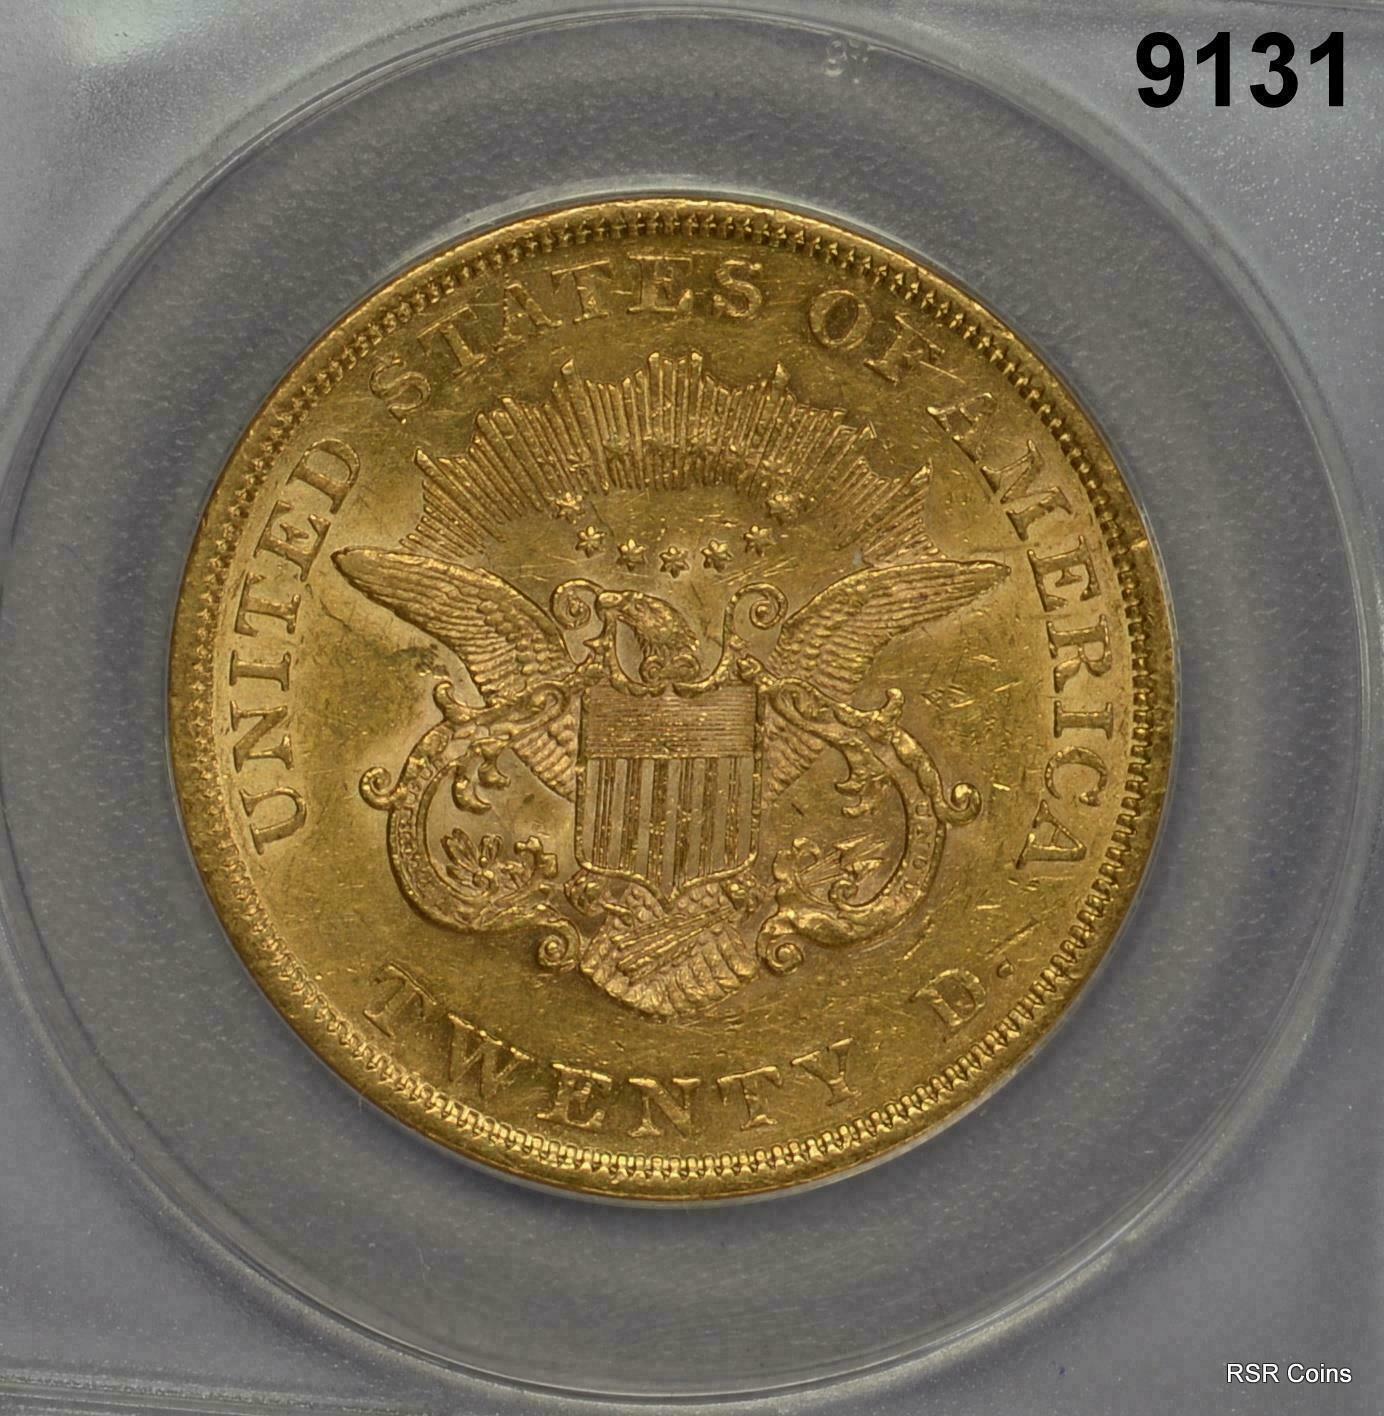 1861 $20 GOLD LIBERTY CIVIL WAR ISSUE! ANACS CERTIFIED AU55 NICE!! #9131